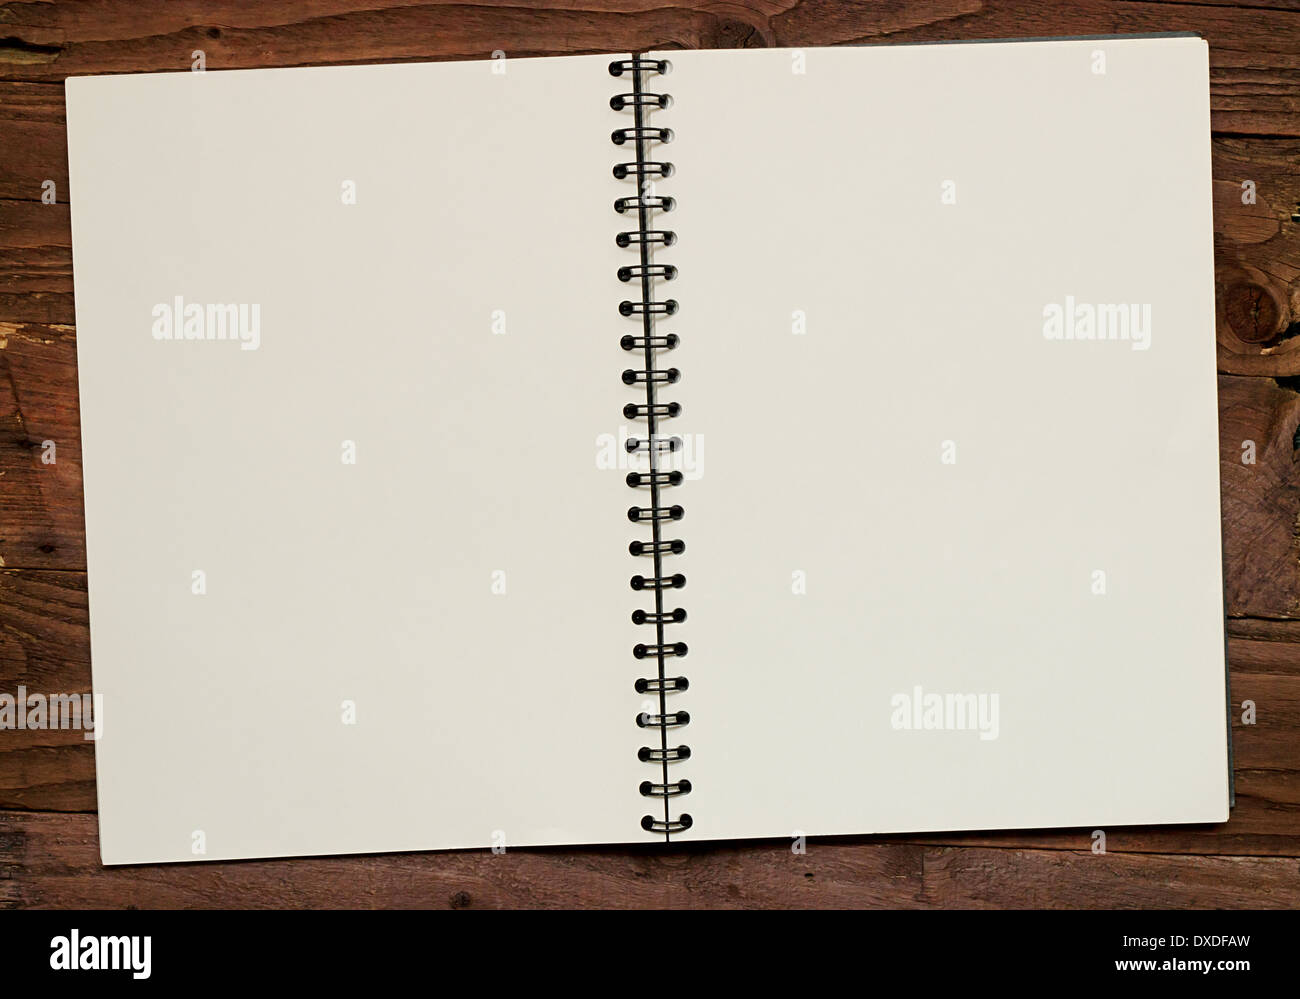 Empty wire bound scrapbook spread open to show blank pages for insertion of your own design elements. Stock Photo